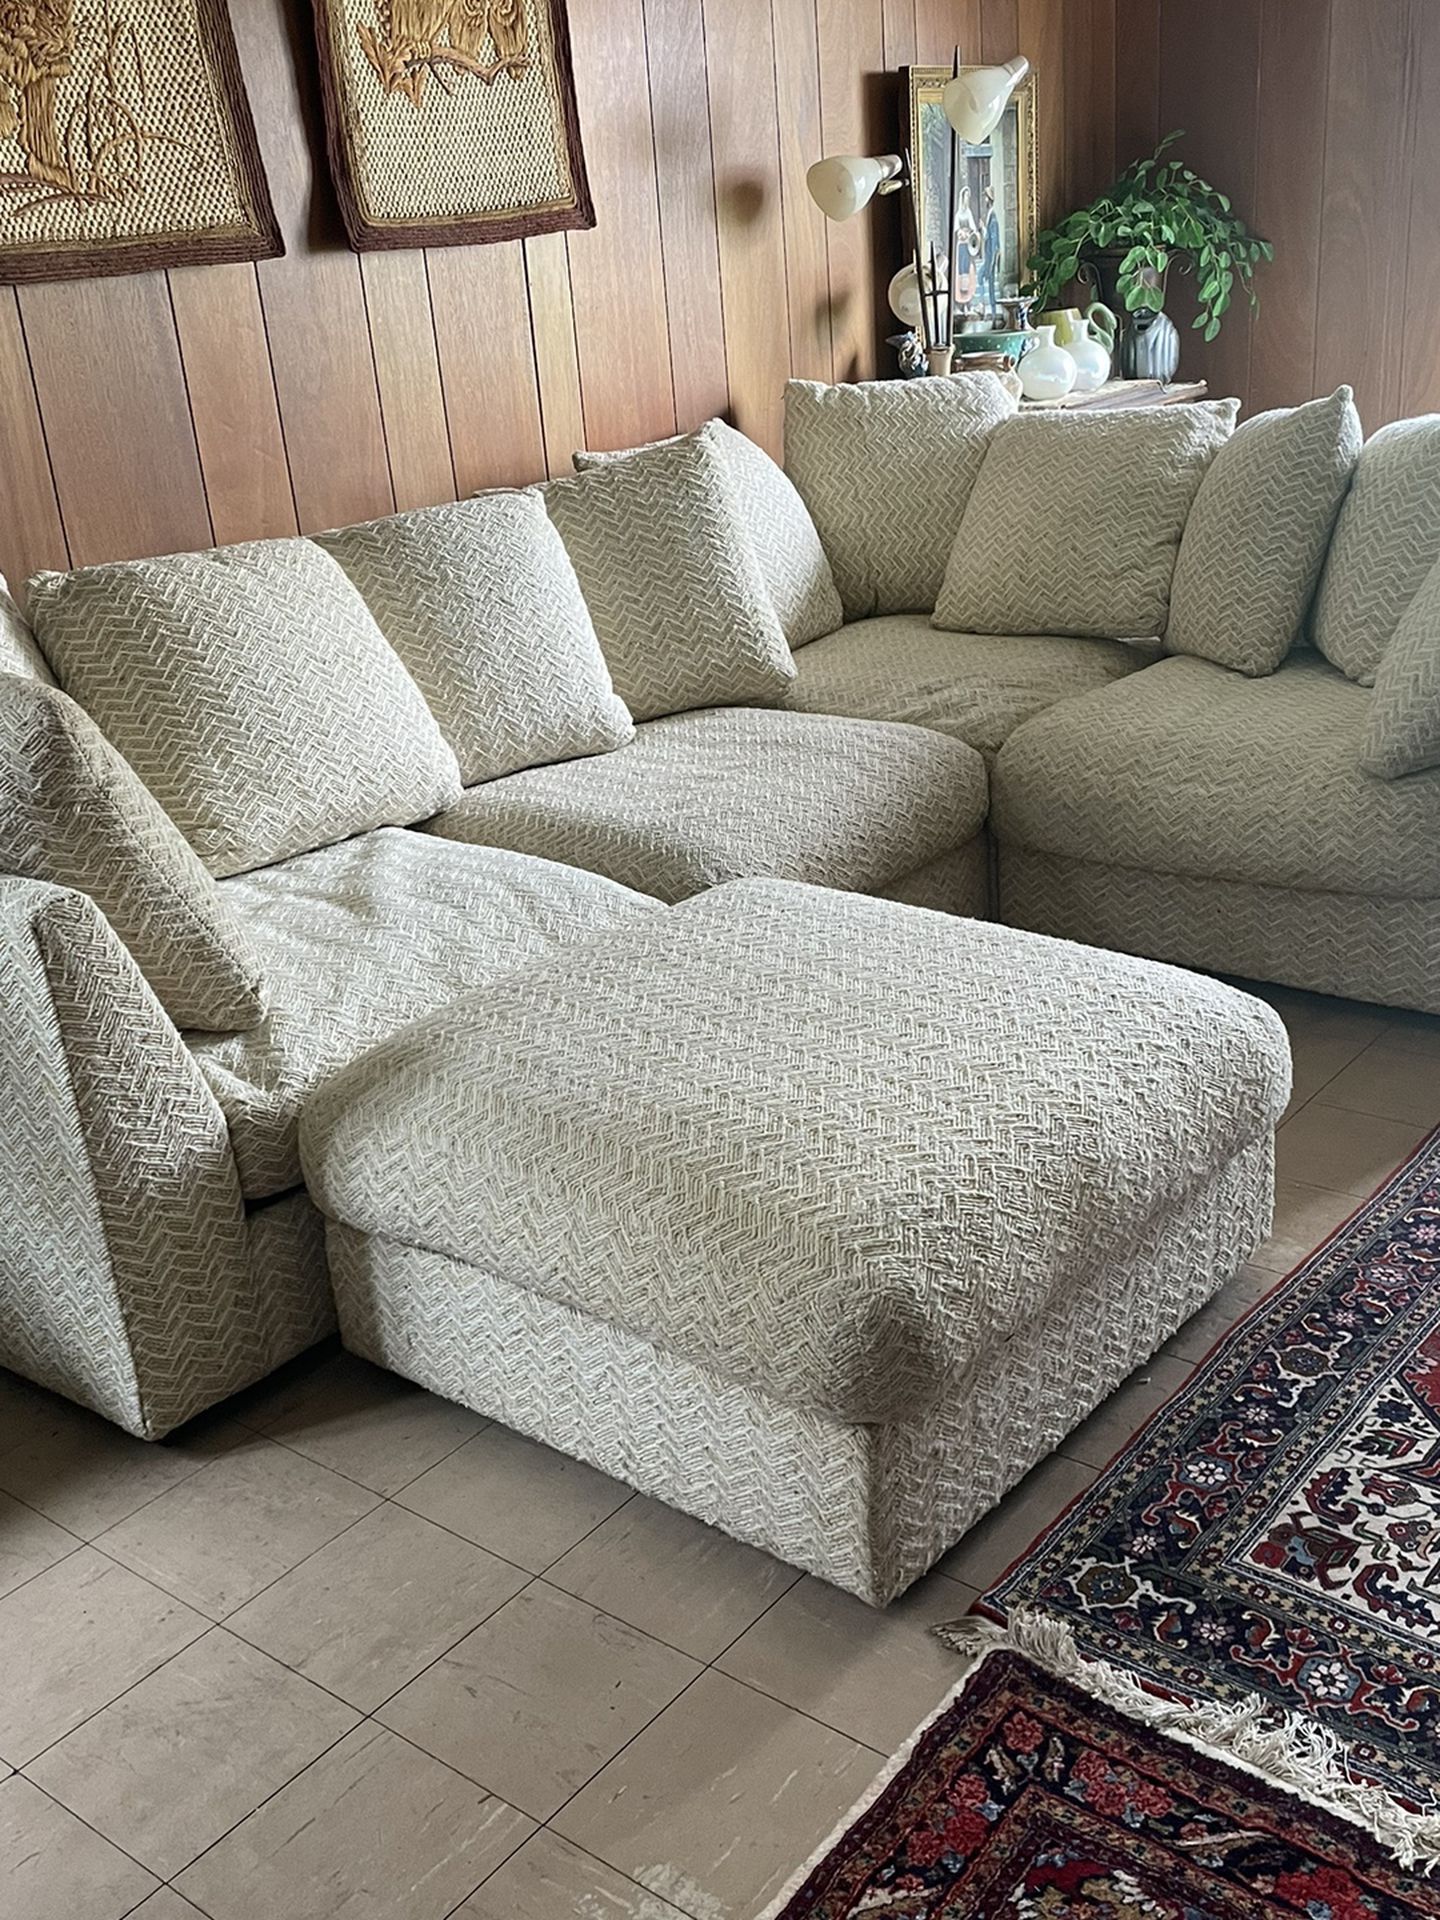 Large 5 Piece Sectional Sofa with Ottoman 